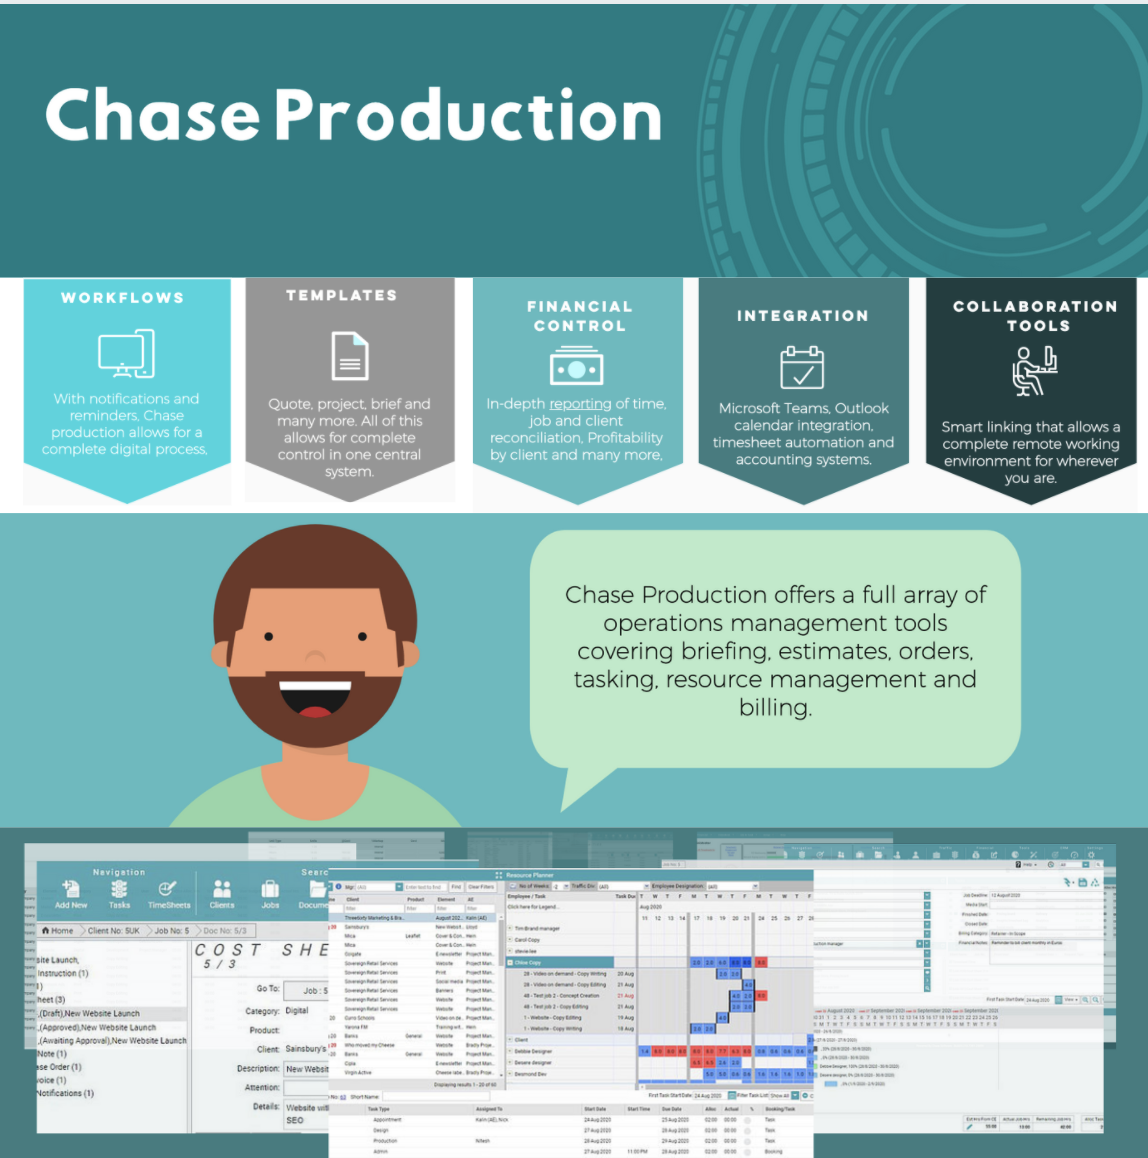 Chase Production - An all-in-one creative agency solution, covering jobs, tasks, costing resource management and approval workflows in a collaborative and structured environment.